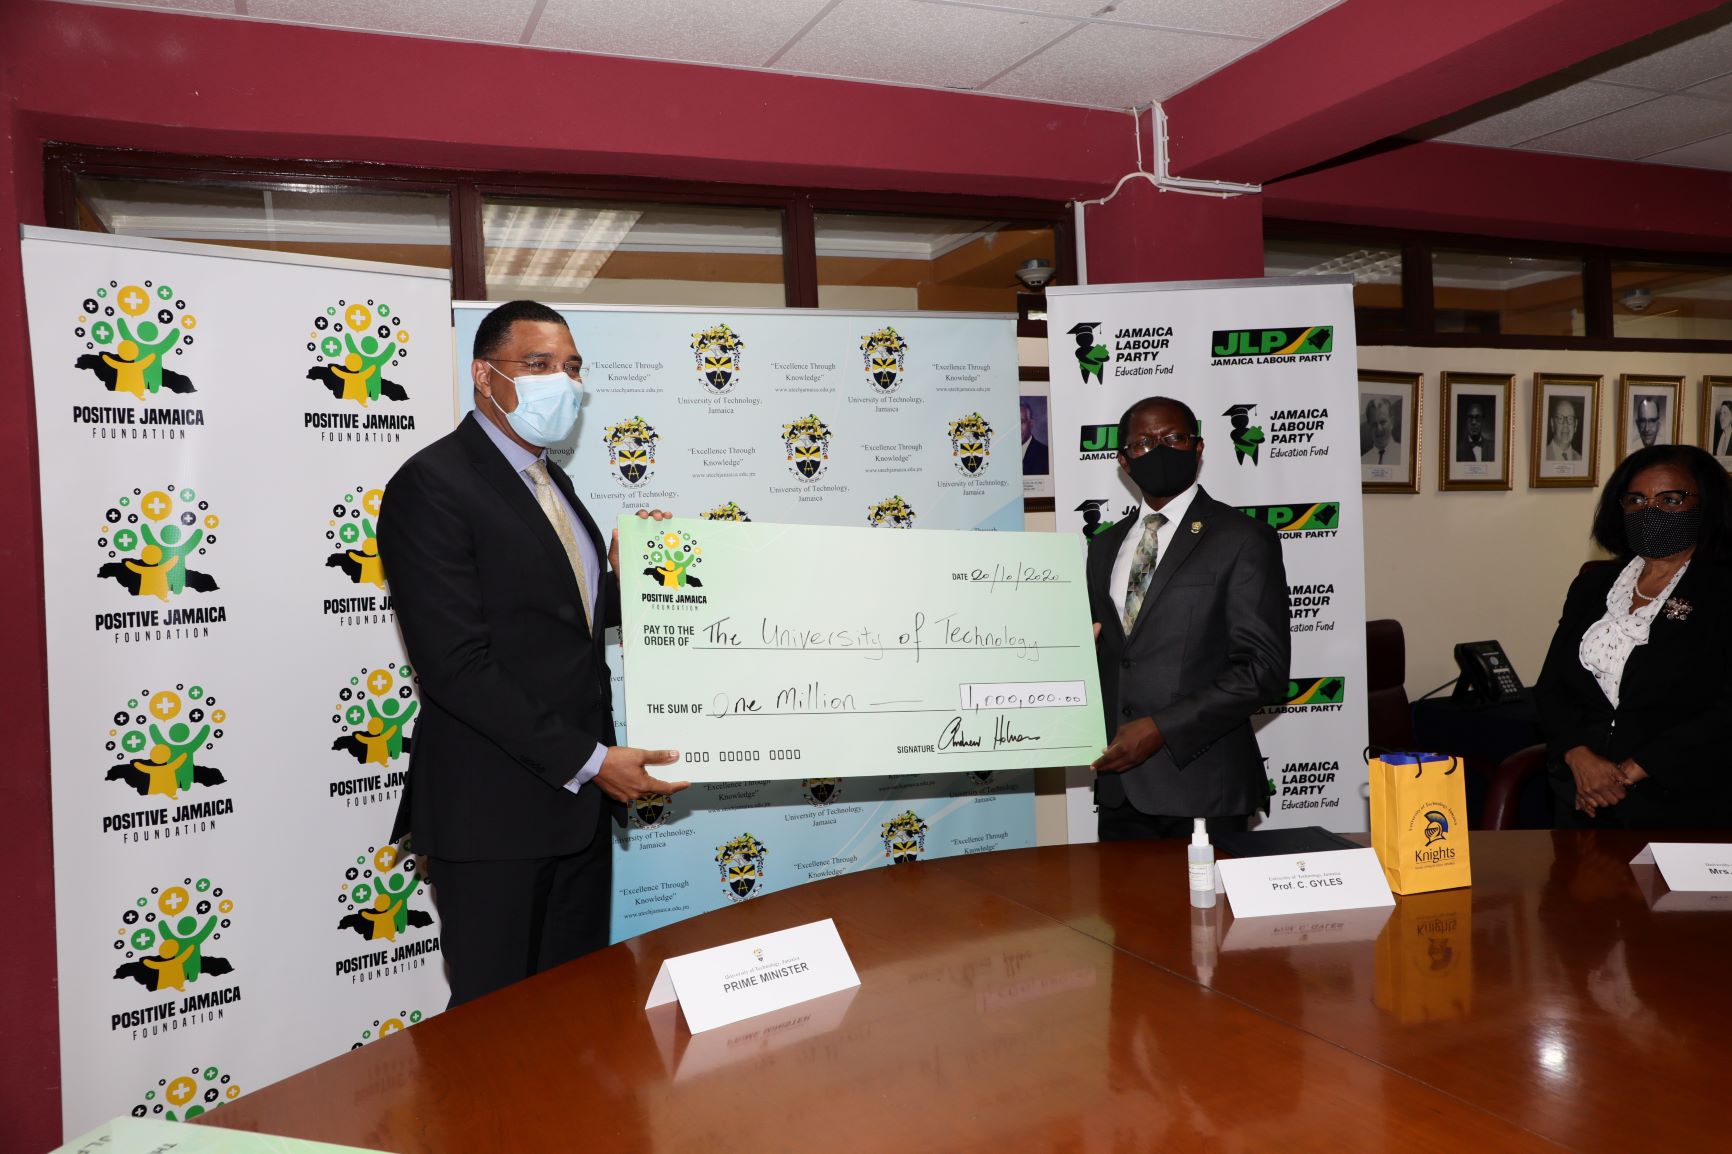 Prime Minister Donates $2.5M to UTech, Jamaica for Students in Need